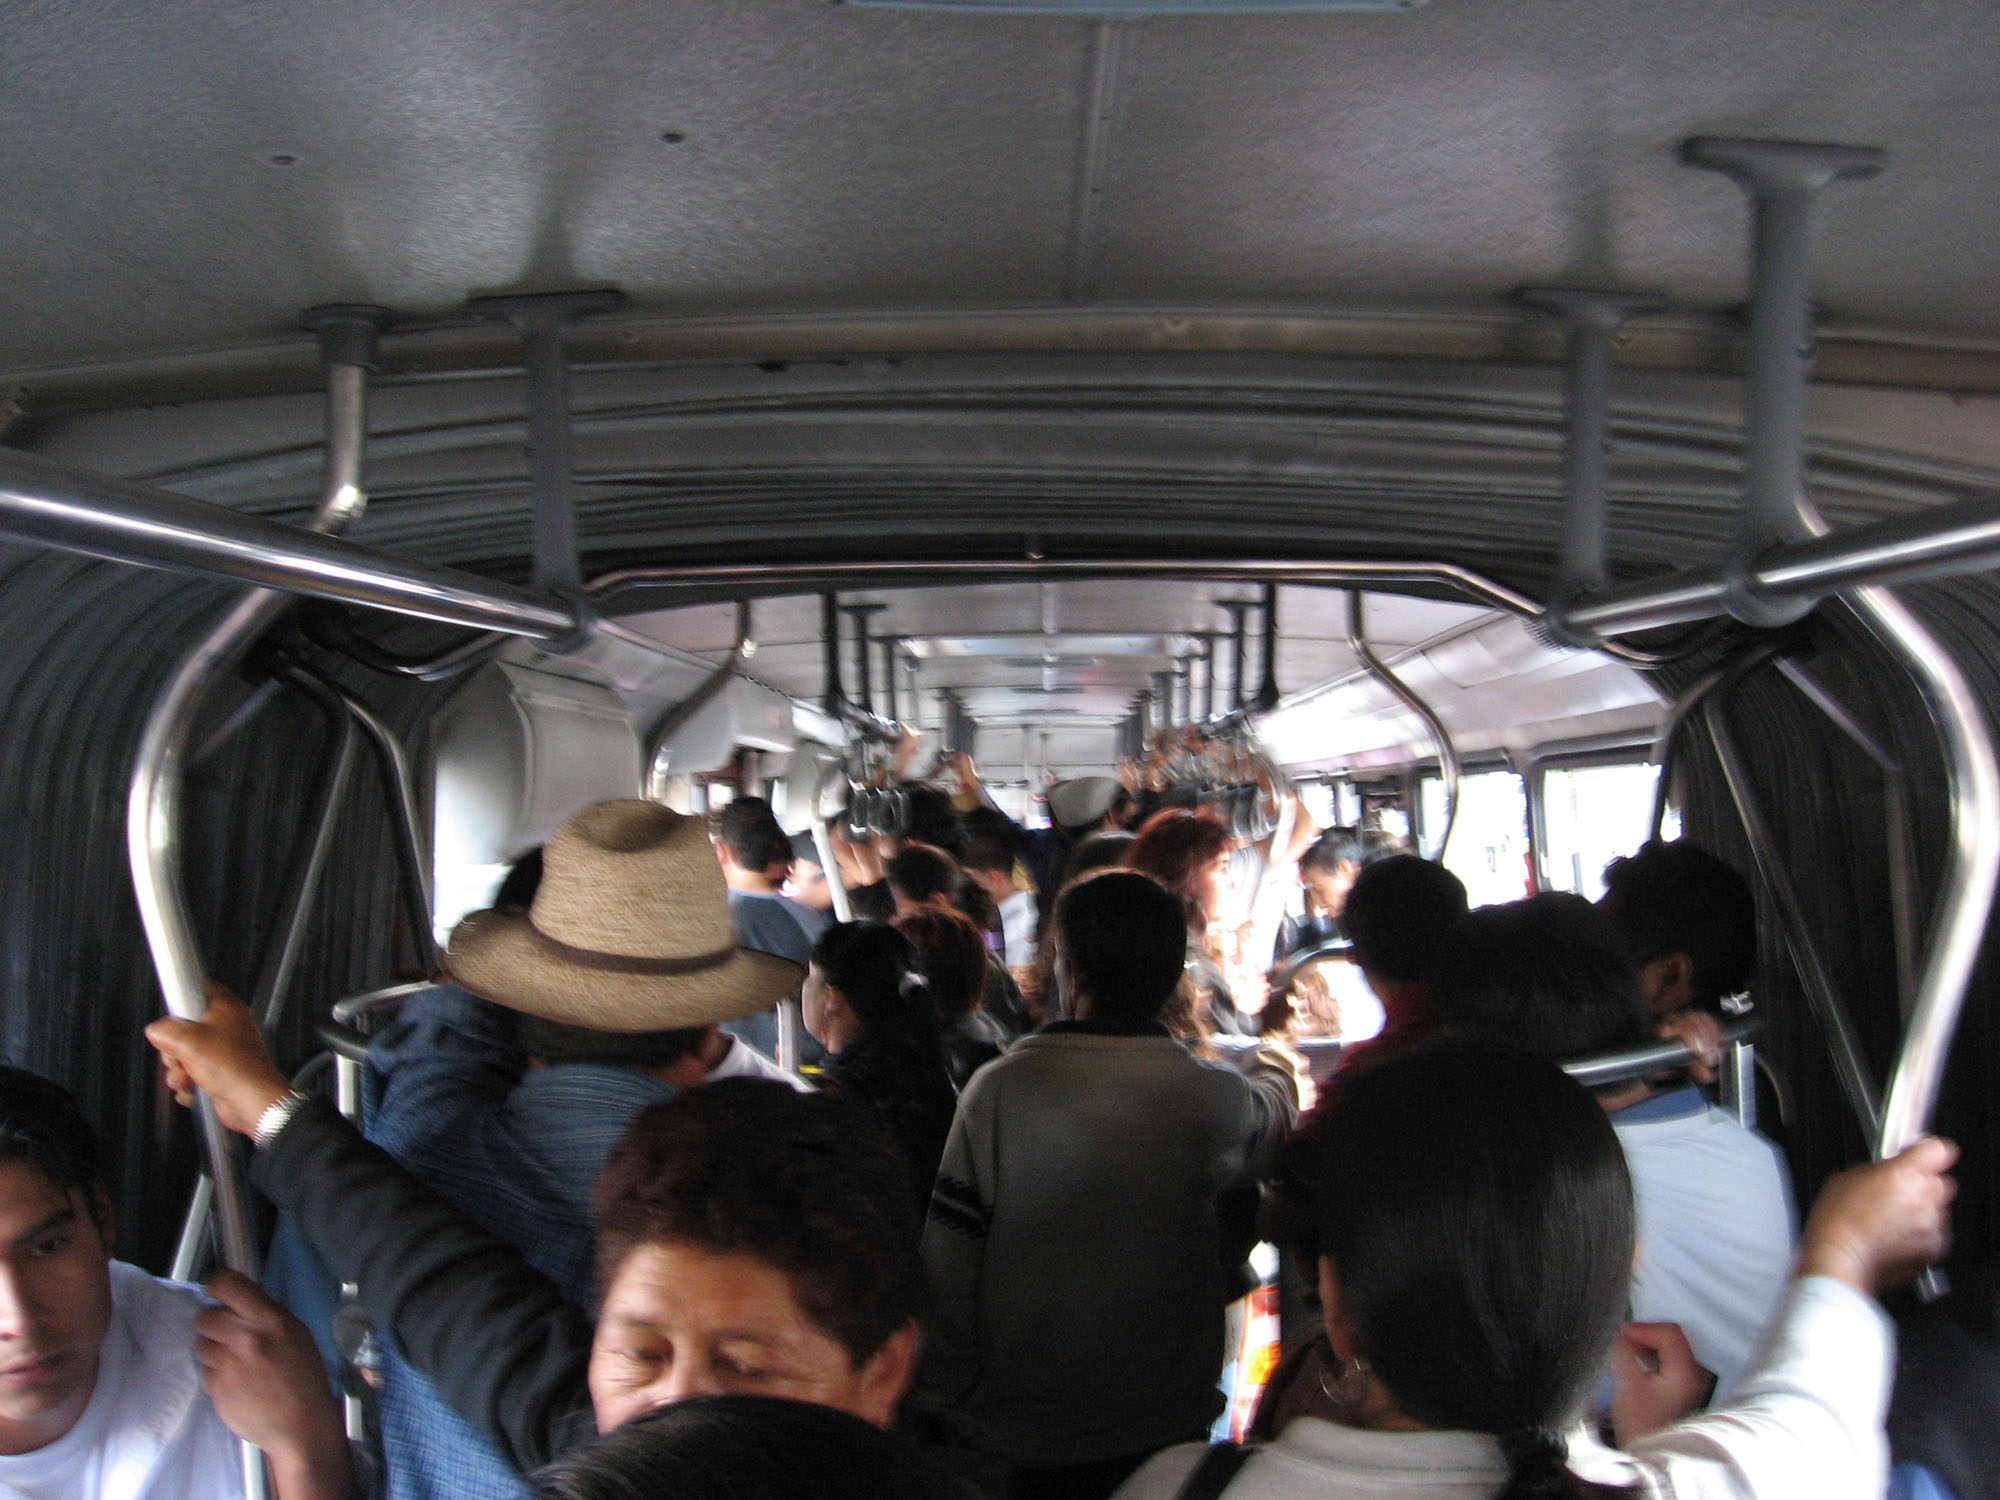 Fig. 20.13 In cities, such as Quito and Bogotá, with relatively short average-trip distances, there can be more tolerance for having many standing customers. In cities with long travel distances, it can be quite tiring to customers.